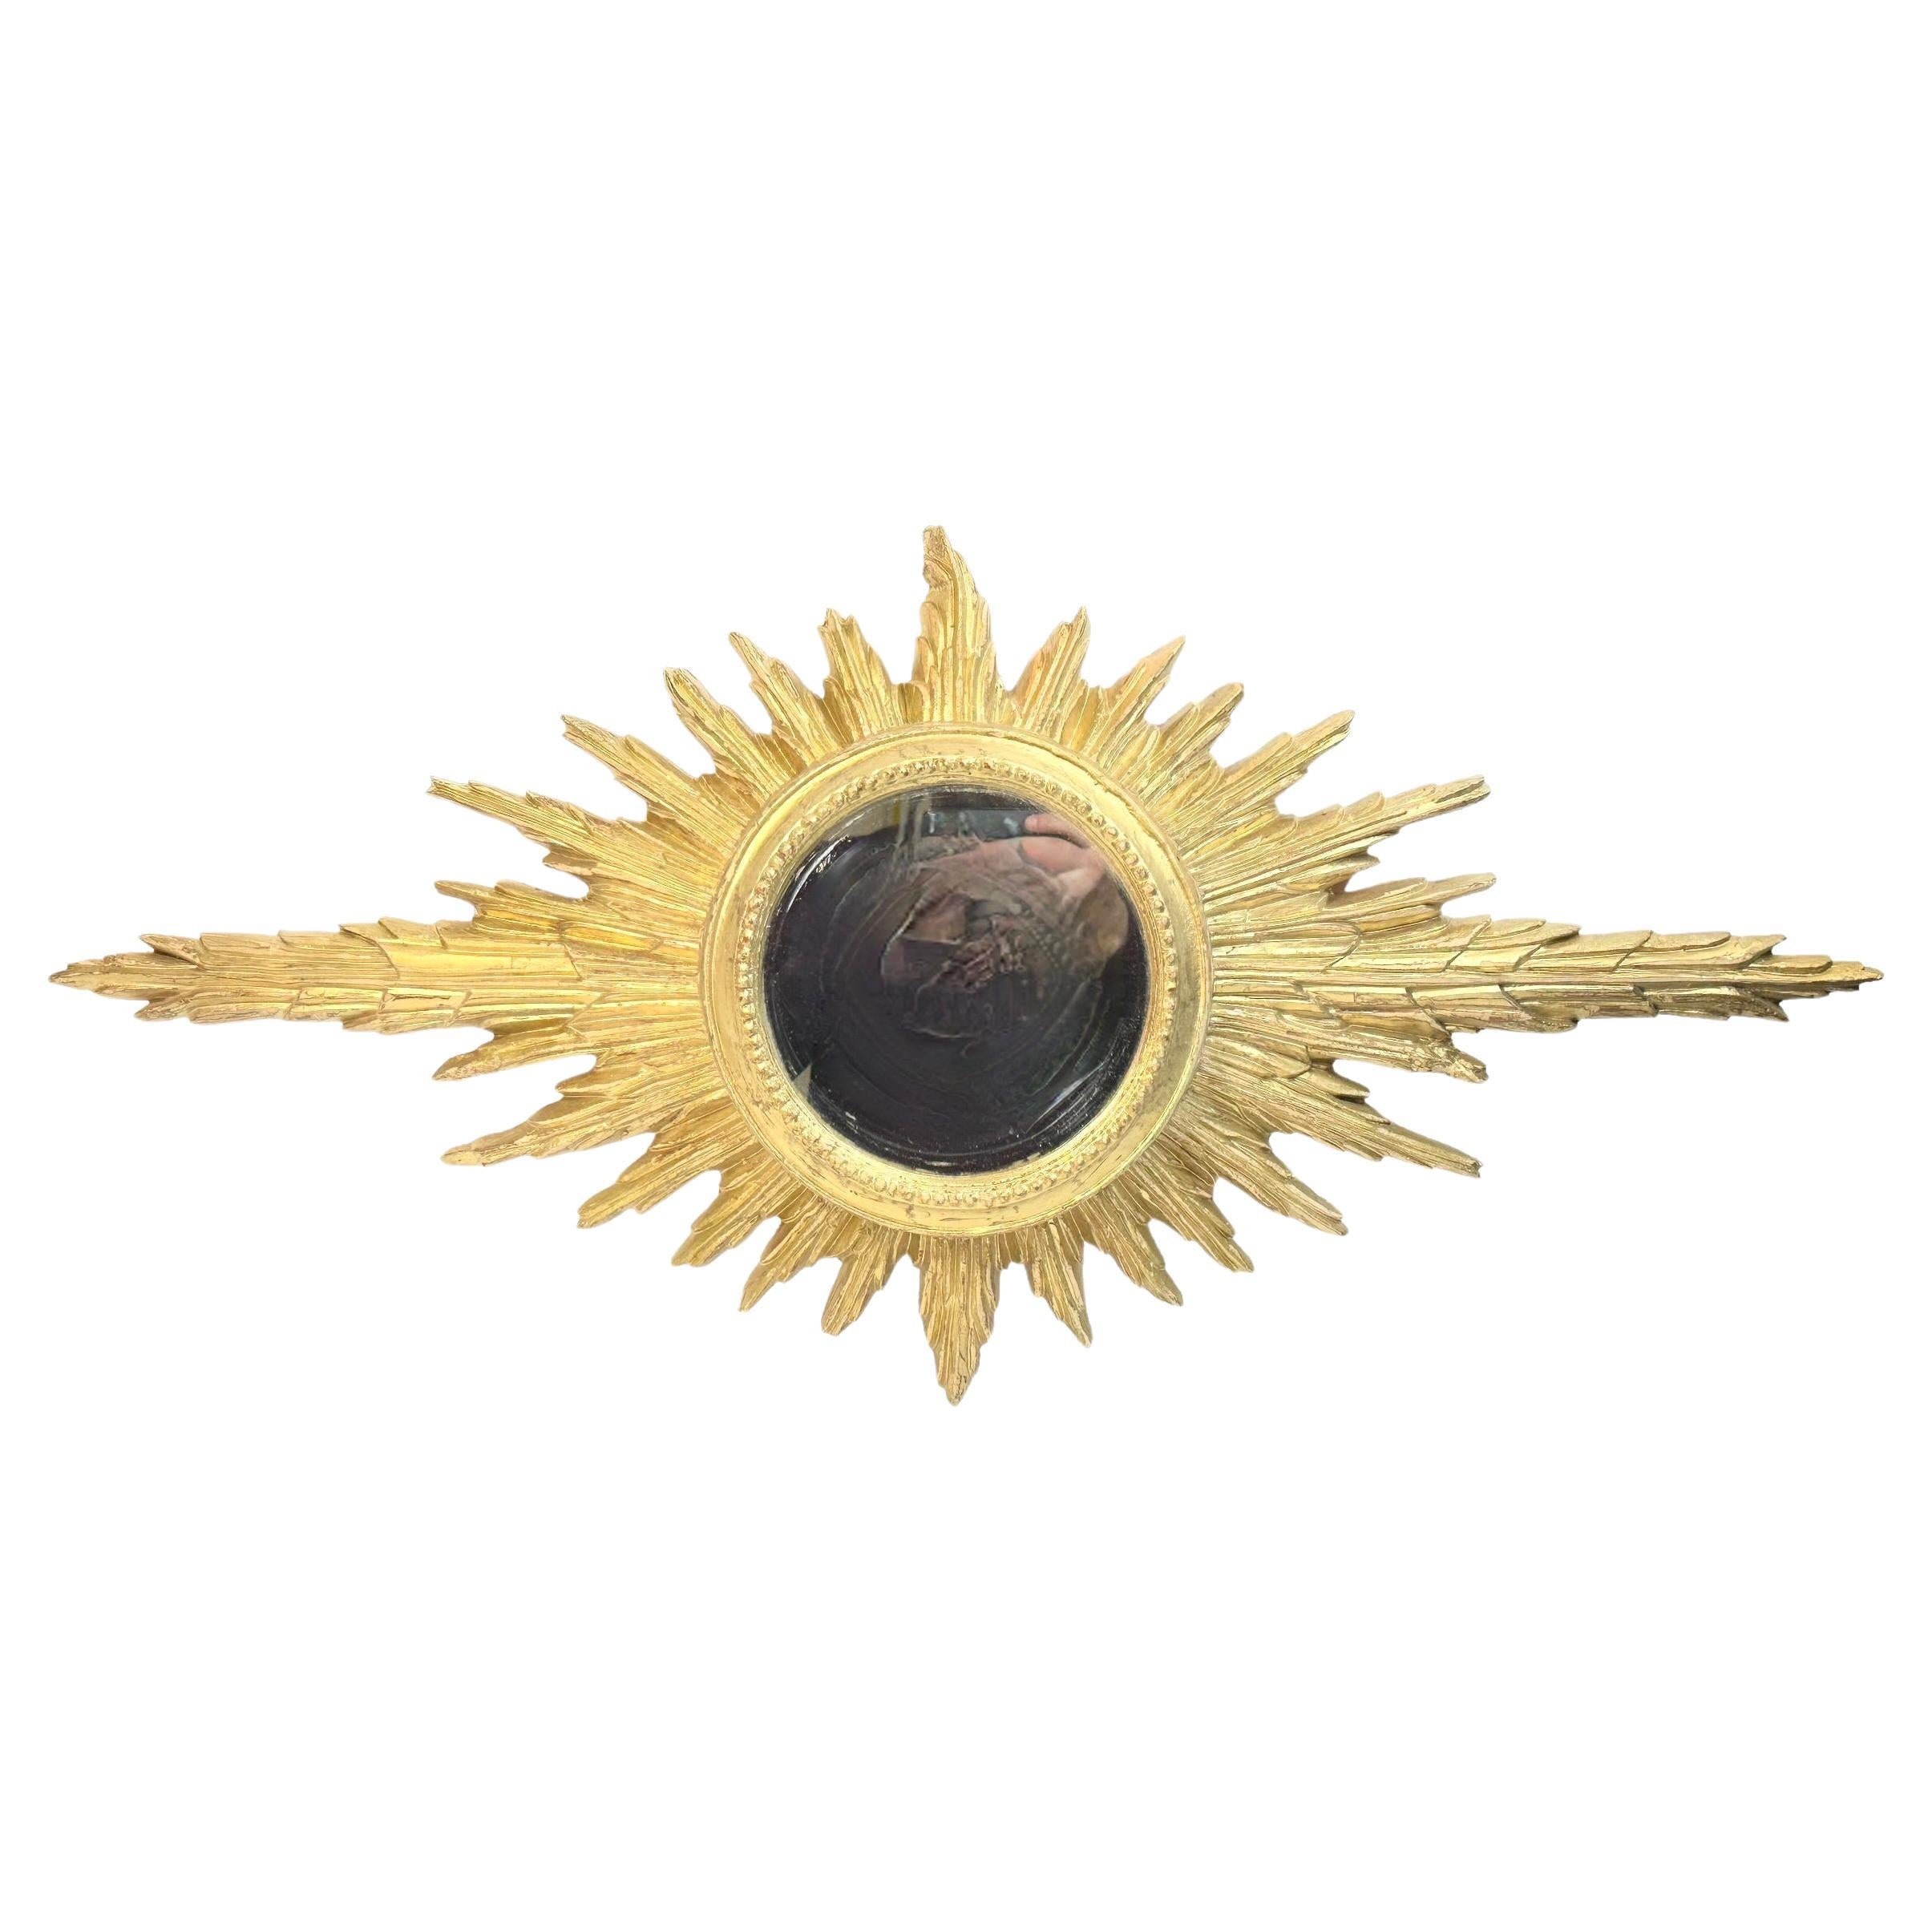 A gorgeous sunburst or starburst mirror. Made of gilded wood. It measures approximate: 36.5